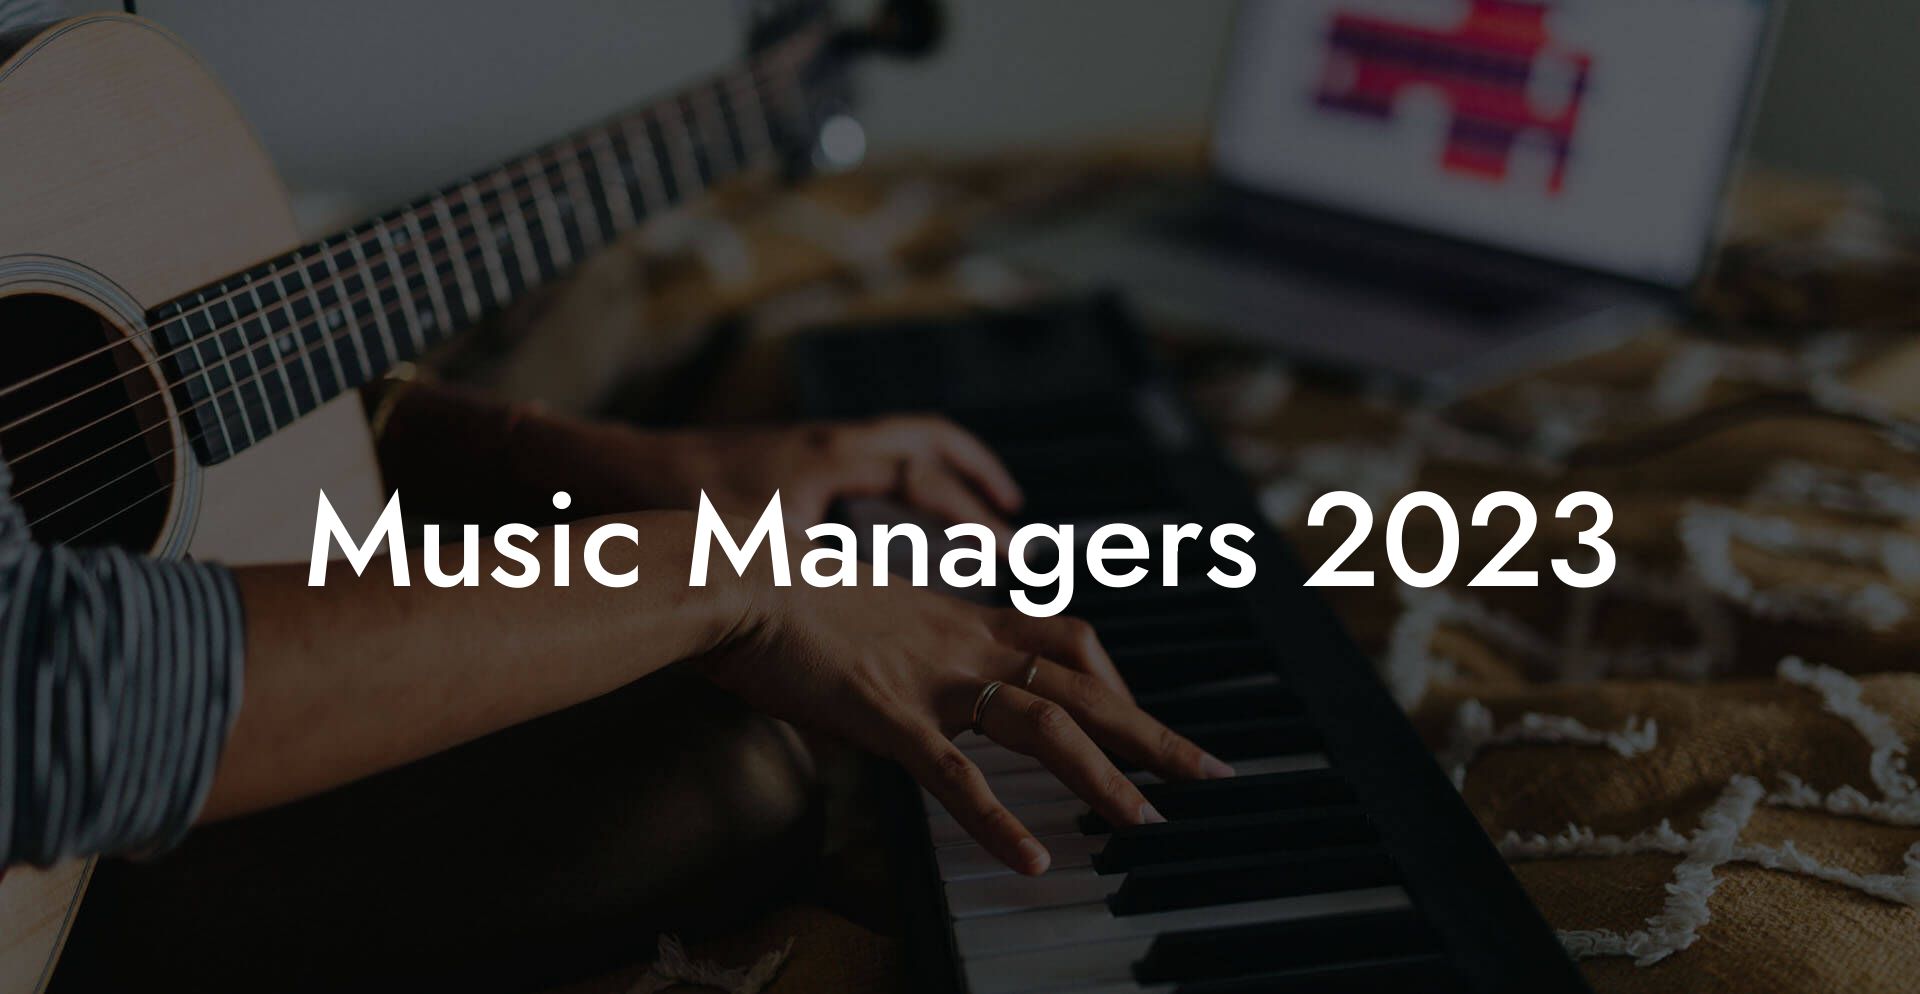 Music Managers 2023